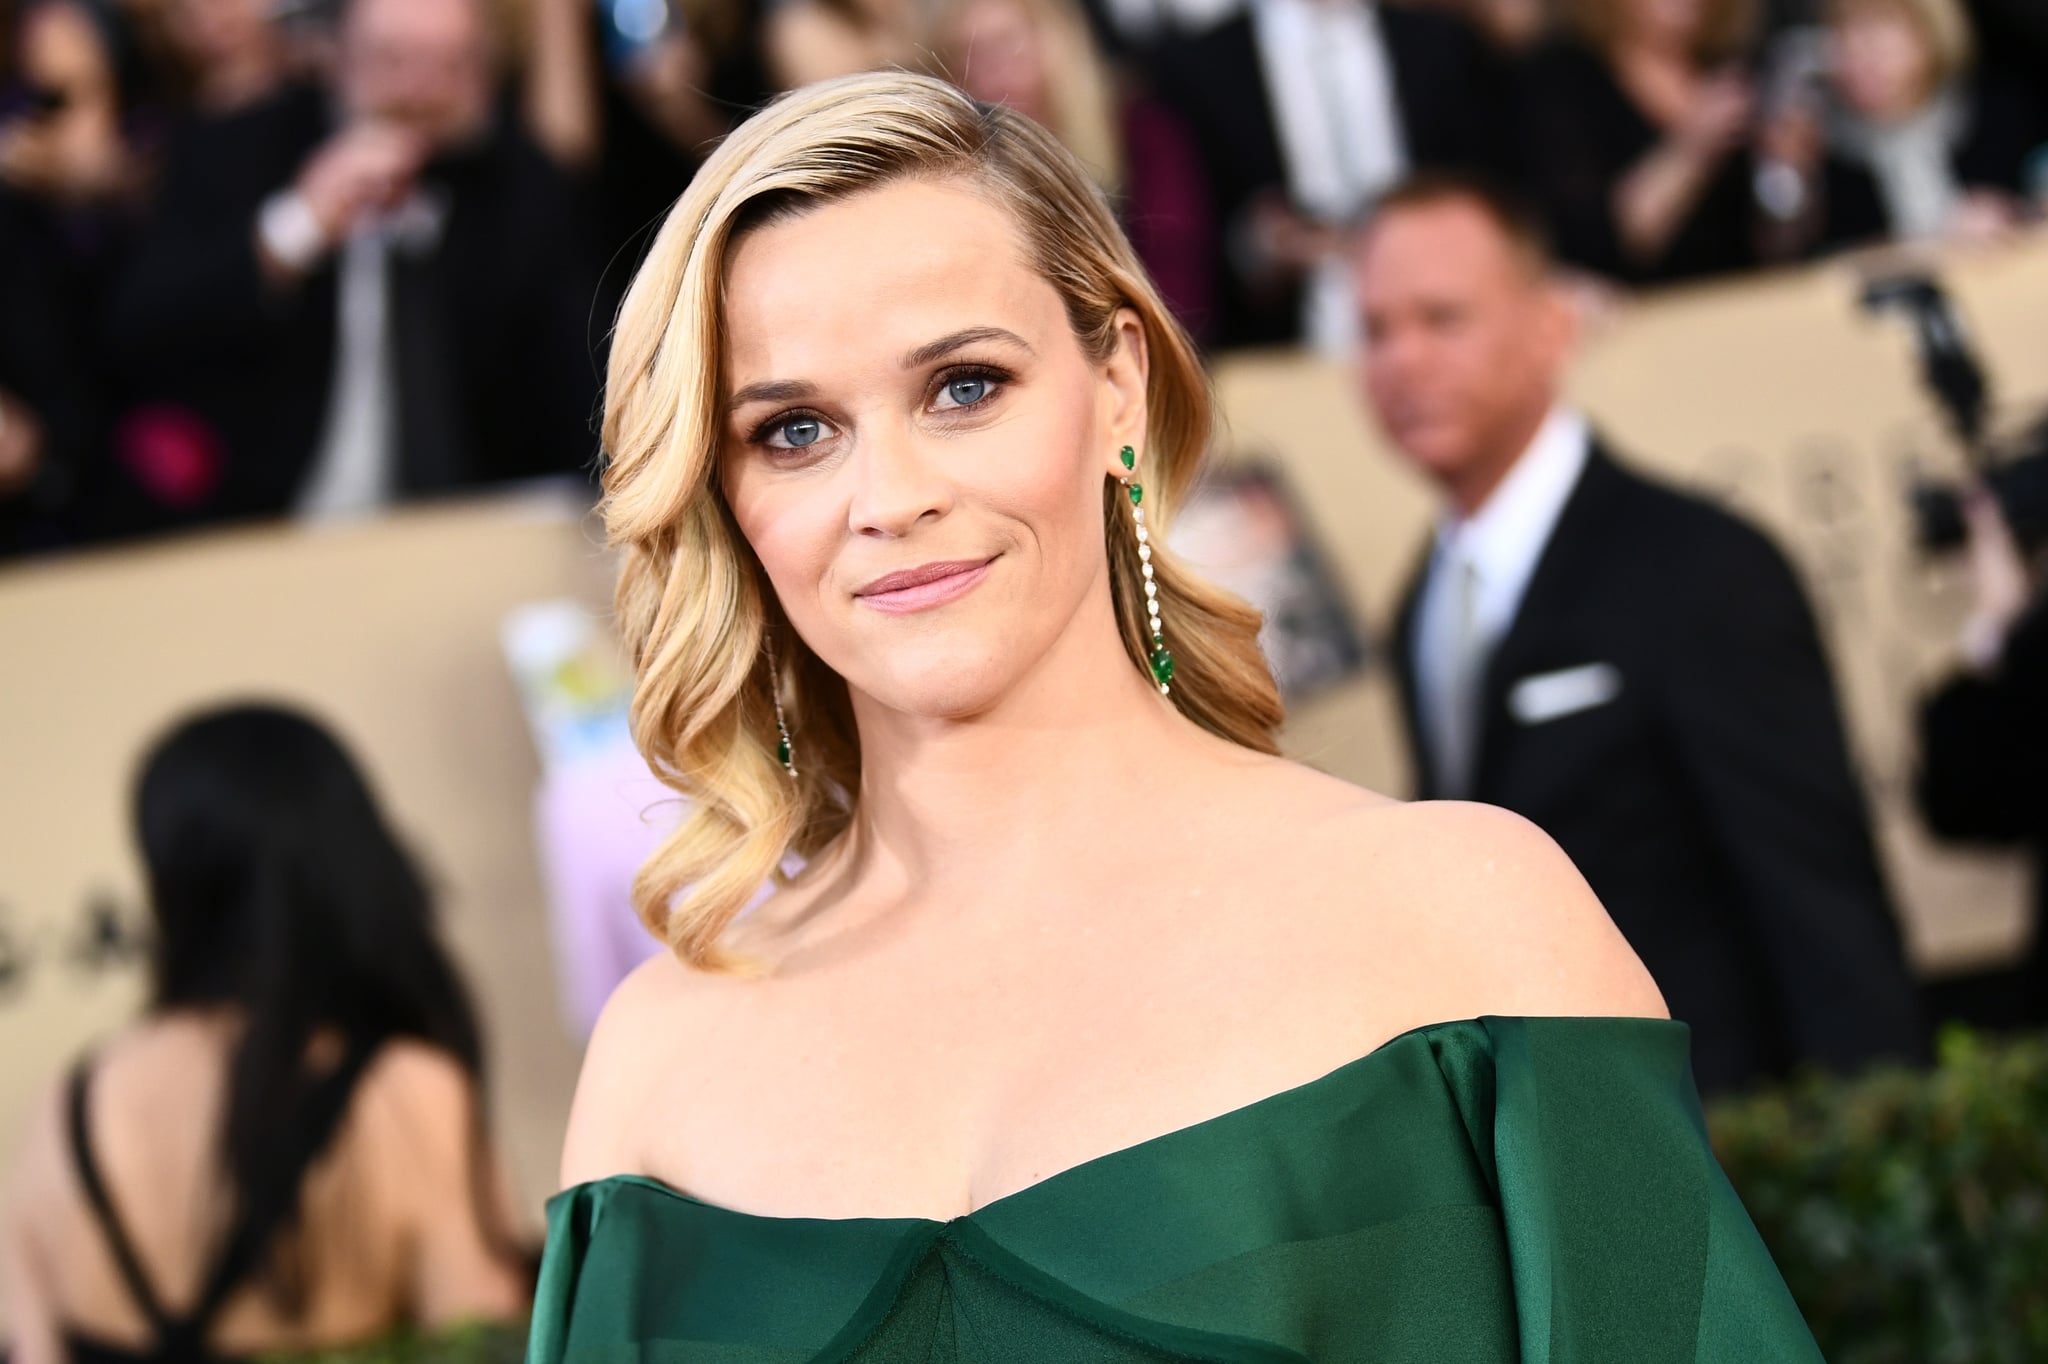 LOS ANGELES, CA - JANUARY 21:  Actor Reese Witherspoon attends the 24th Annual Screen Actors Guild Awards at The Shrine Auditorium on January 21, 2018 in Los Angeles, California. 27522_011  (Photo by Emma McIntyre/Getty Images for Turner)